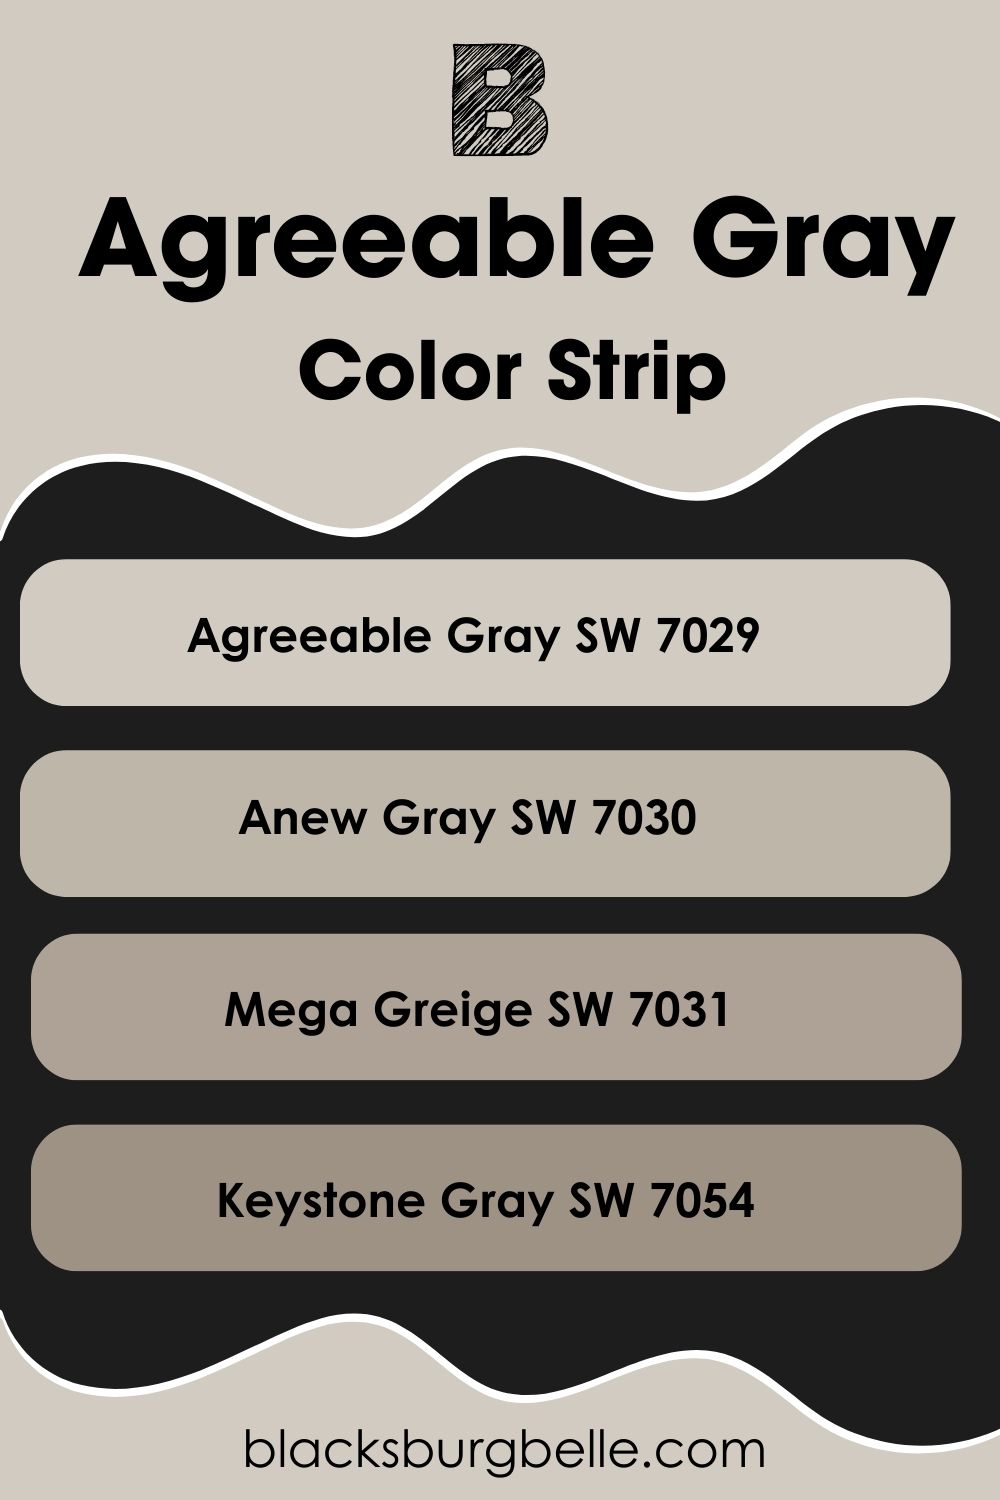 Agreeable Gray Color Strip